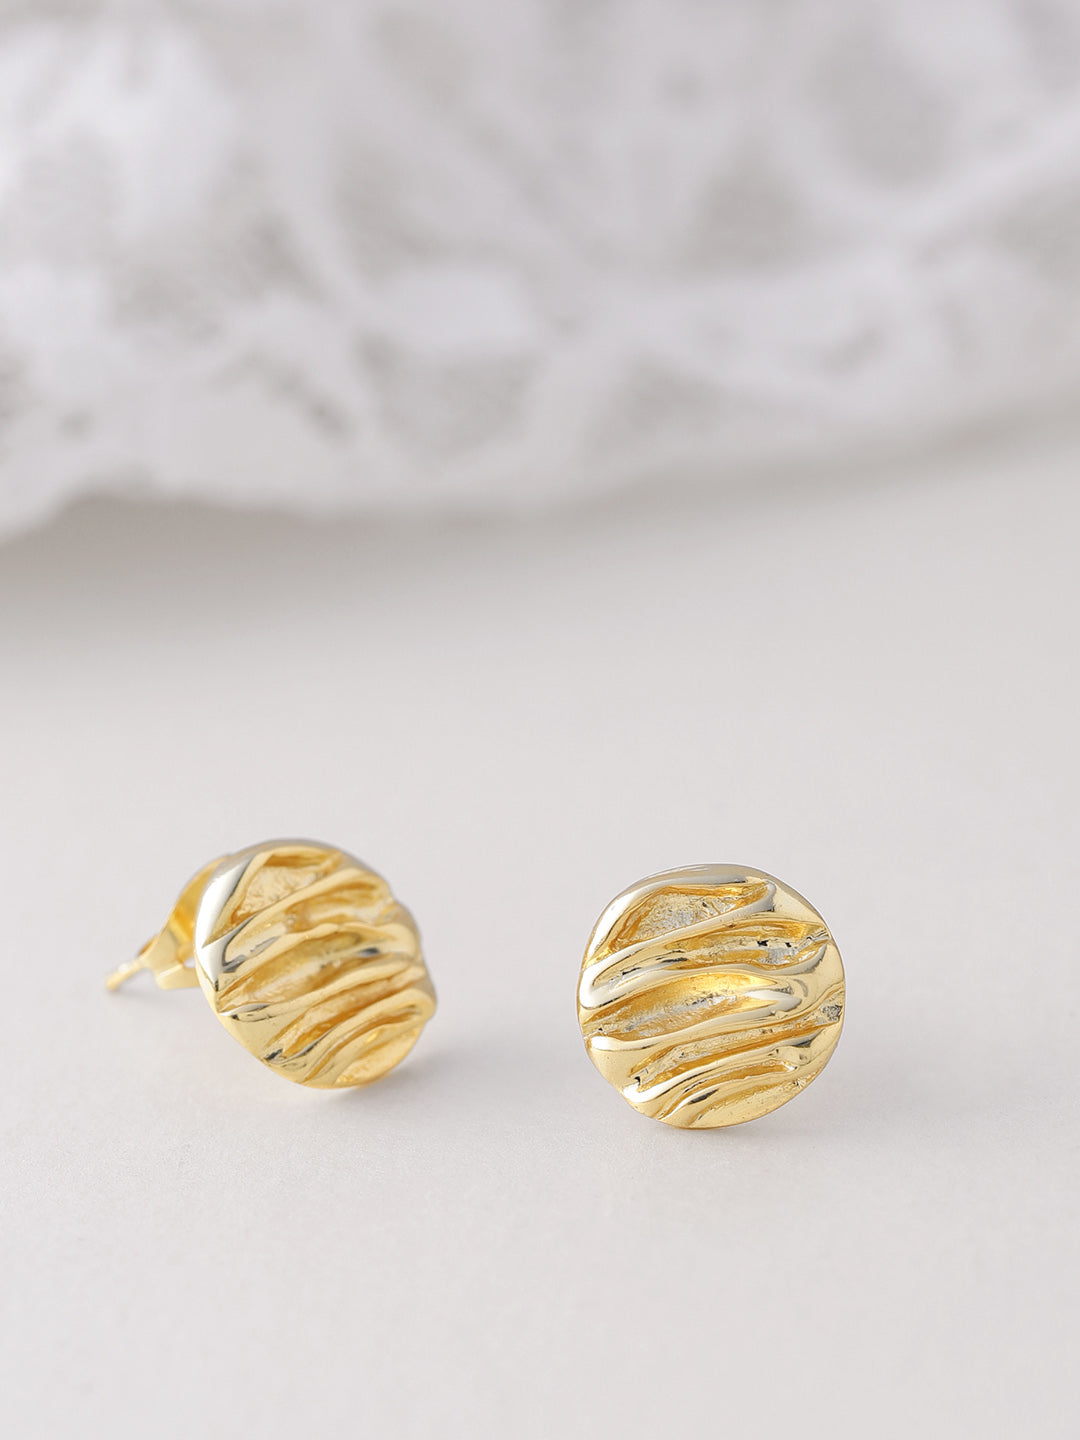 Gold Plated Circular Shape Contemporary Stud Earrings